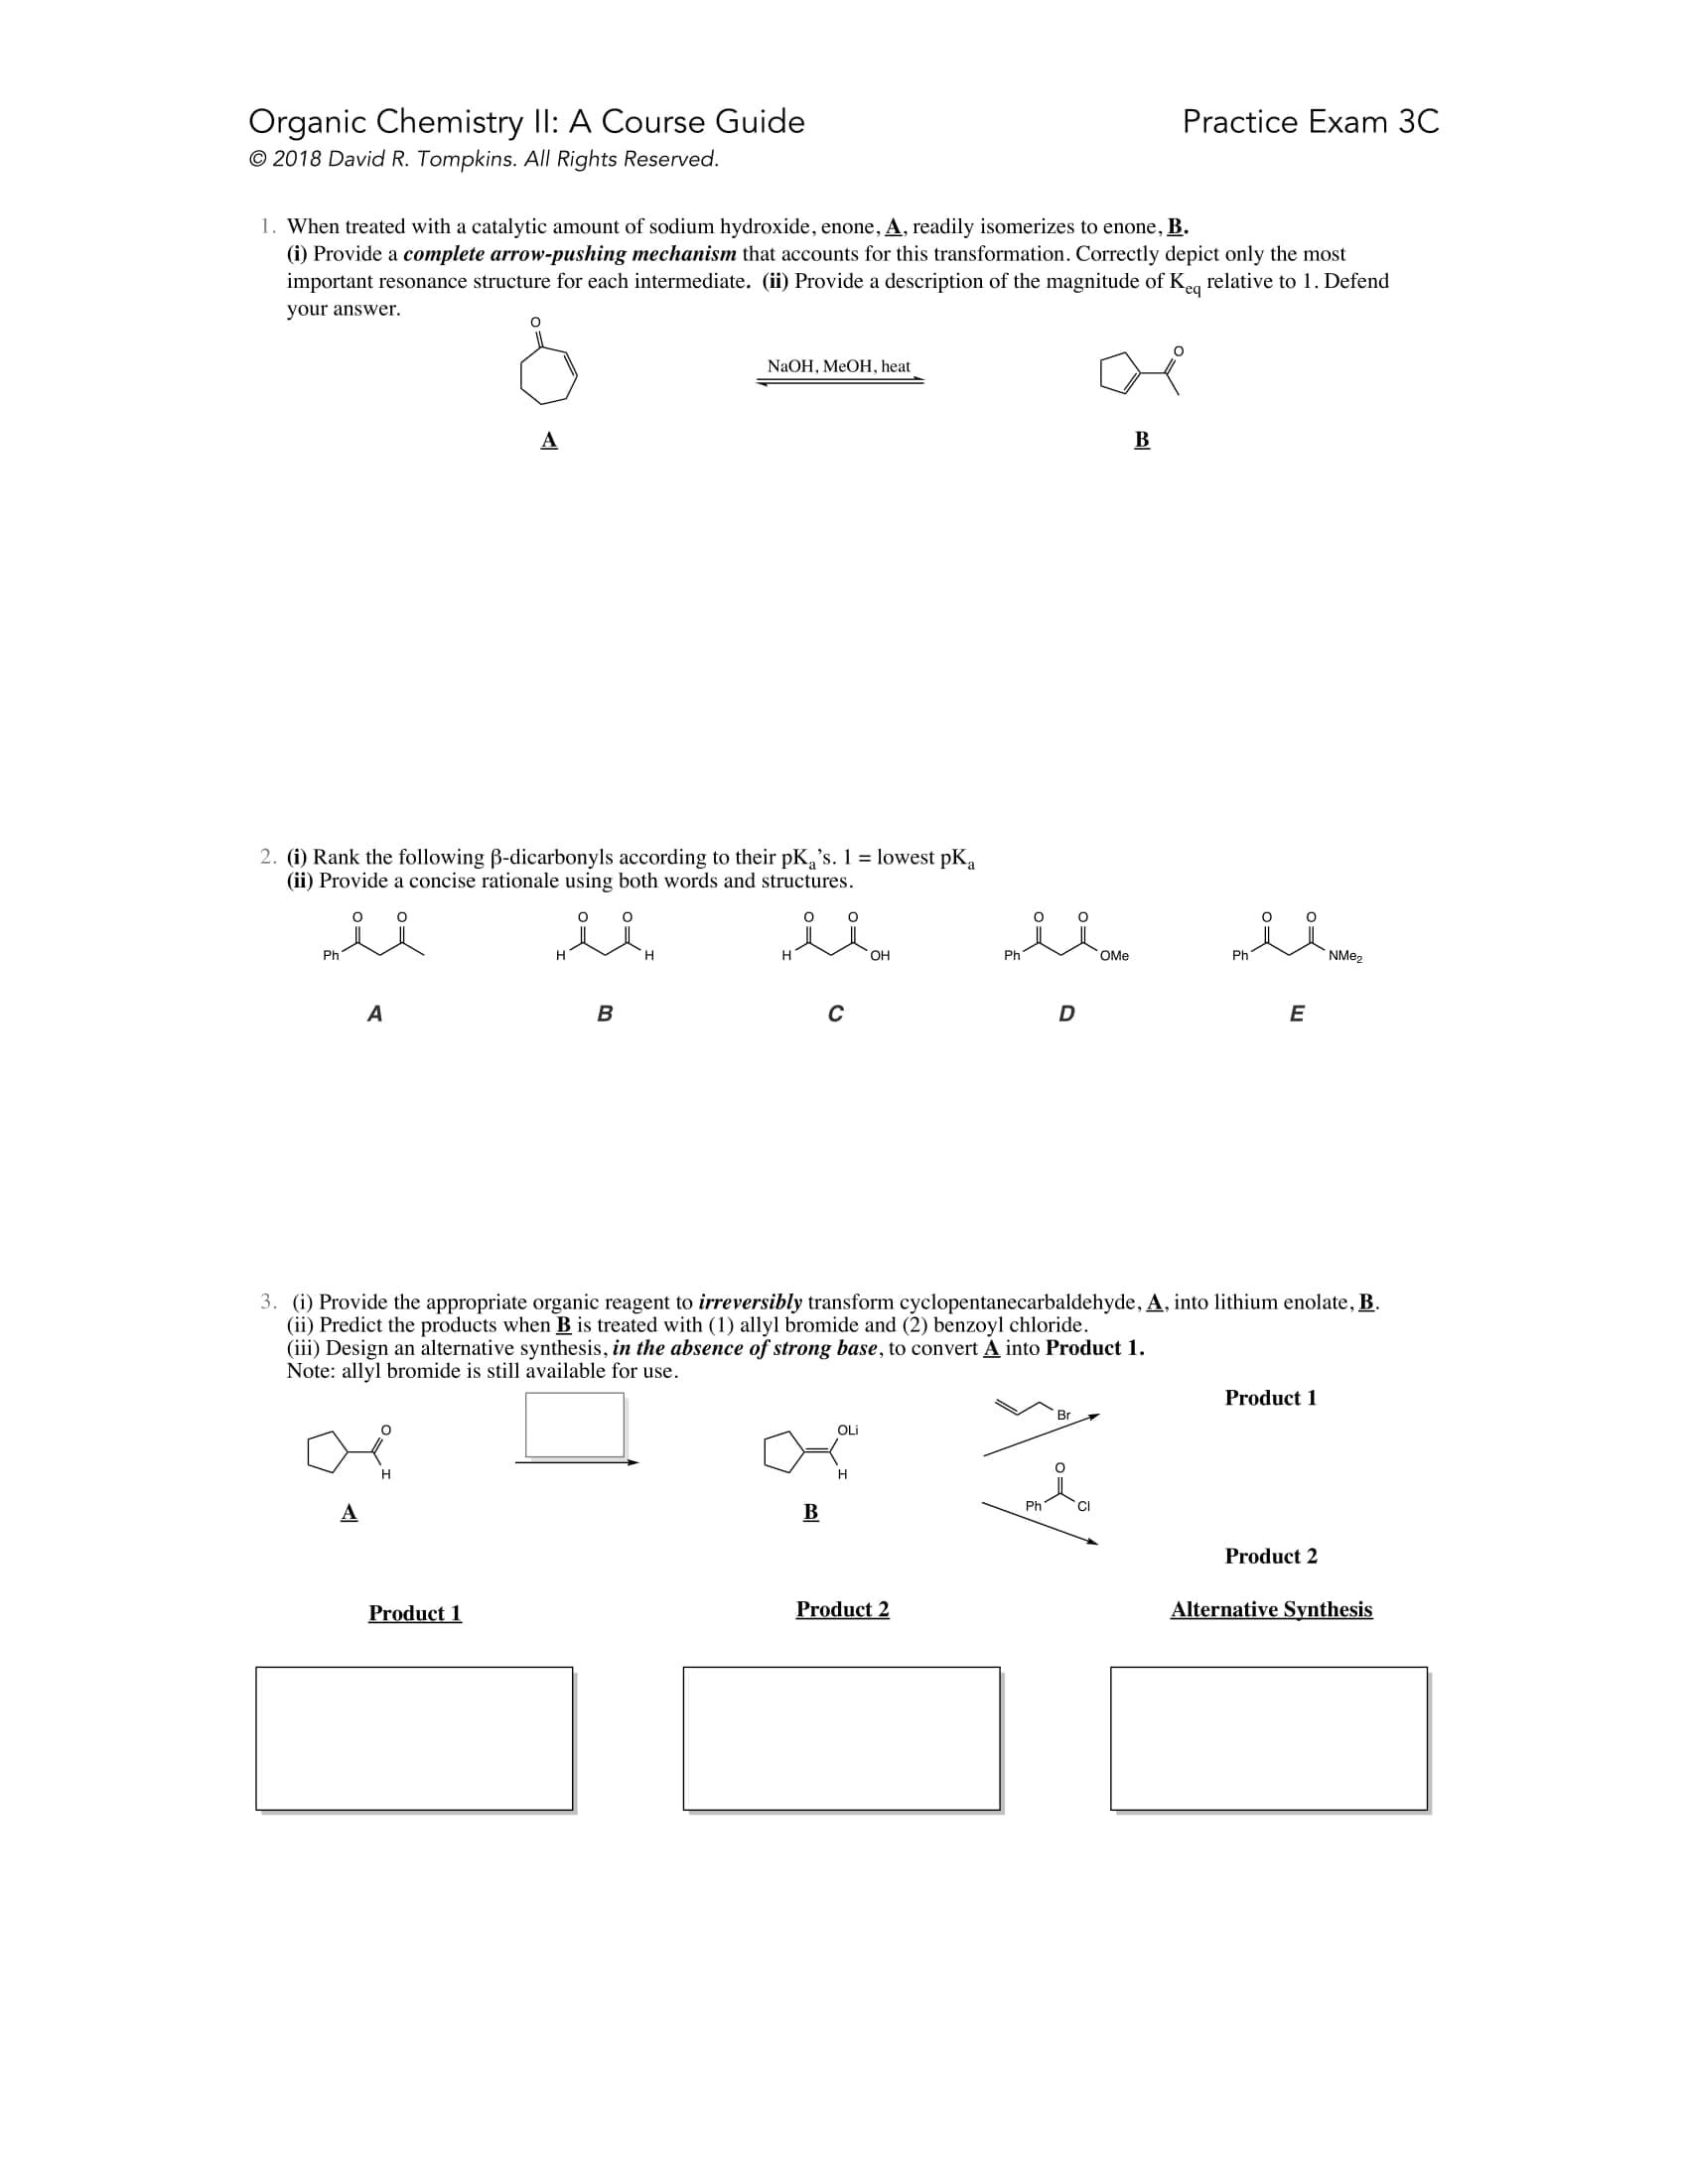 Introduction to Organic II Chemistry (Duke) Course Guide Example Page 3